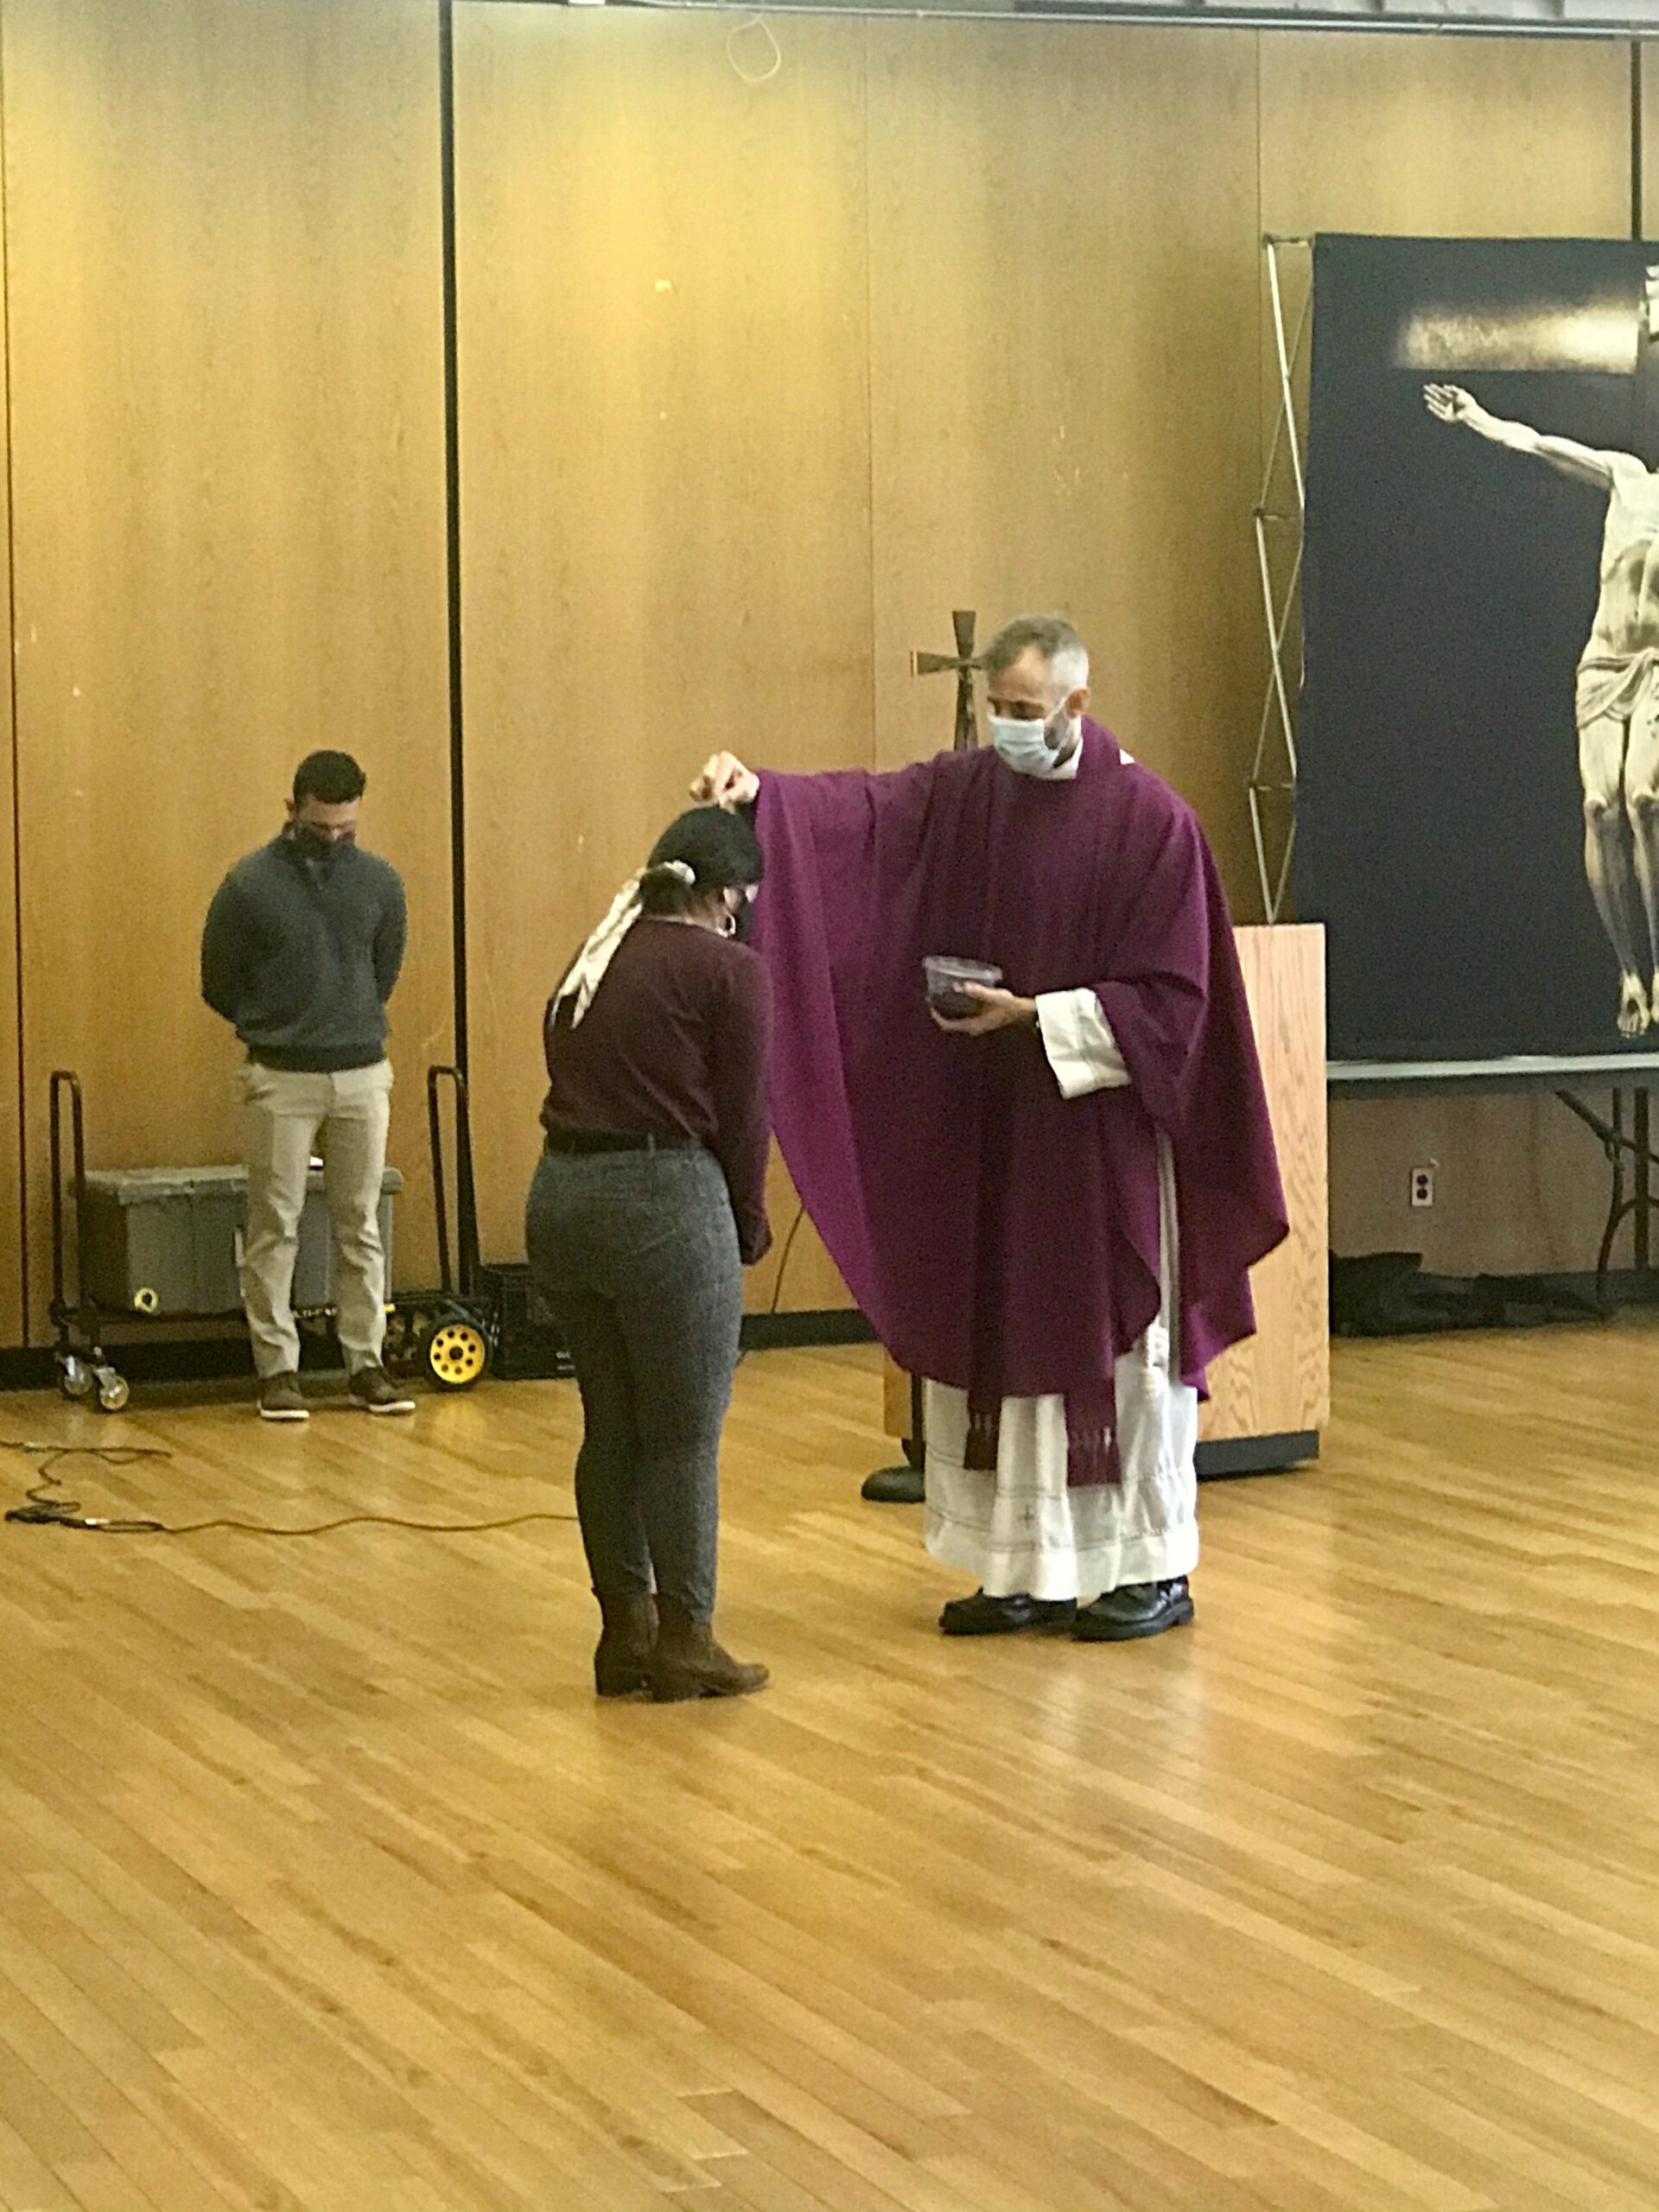 ASH WEDNESDAY REVISITED Homily on the Spot